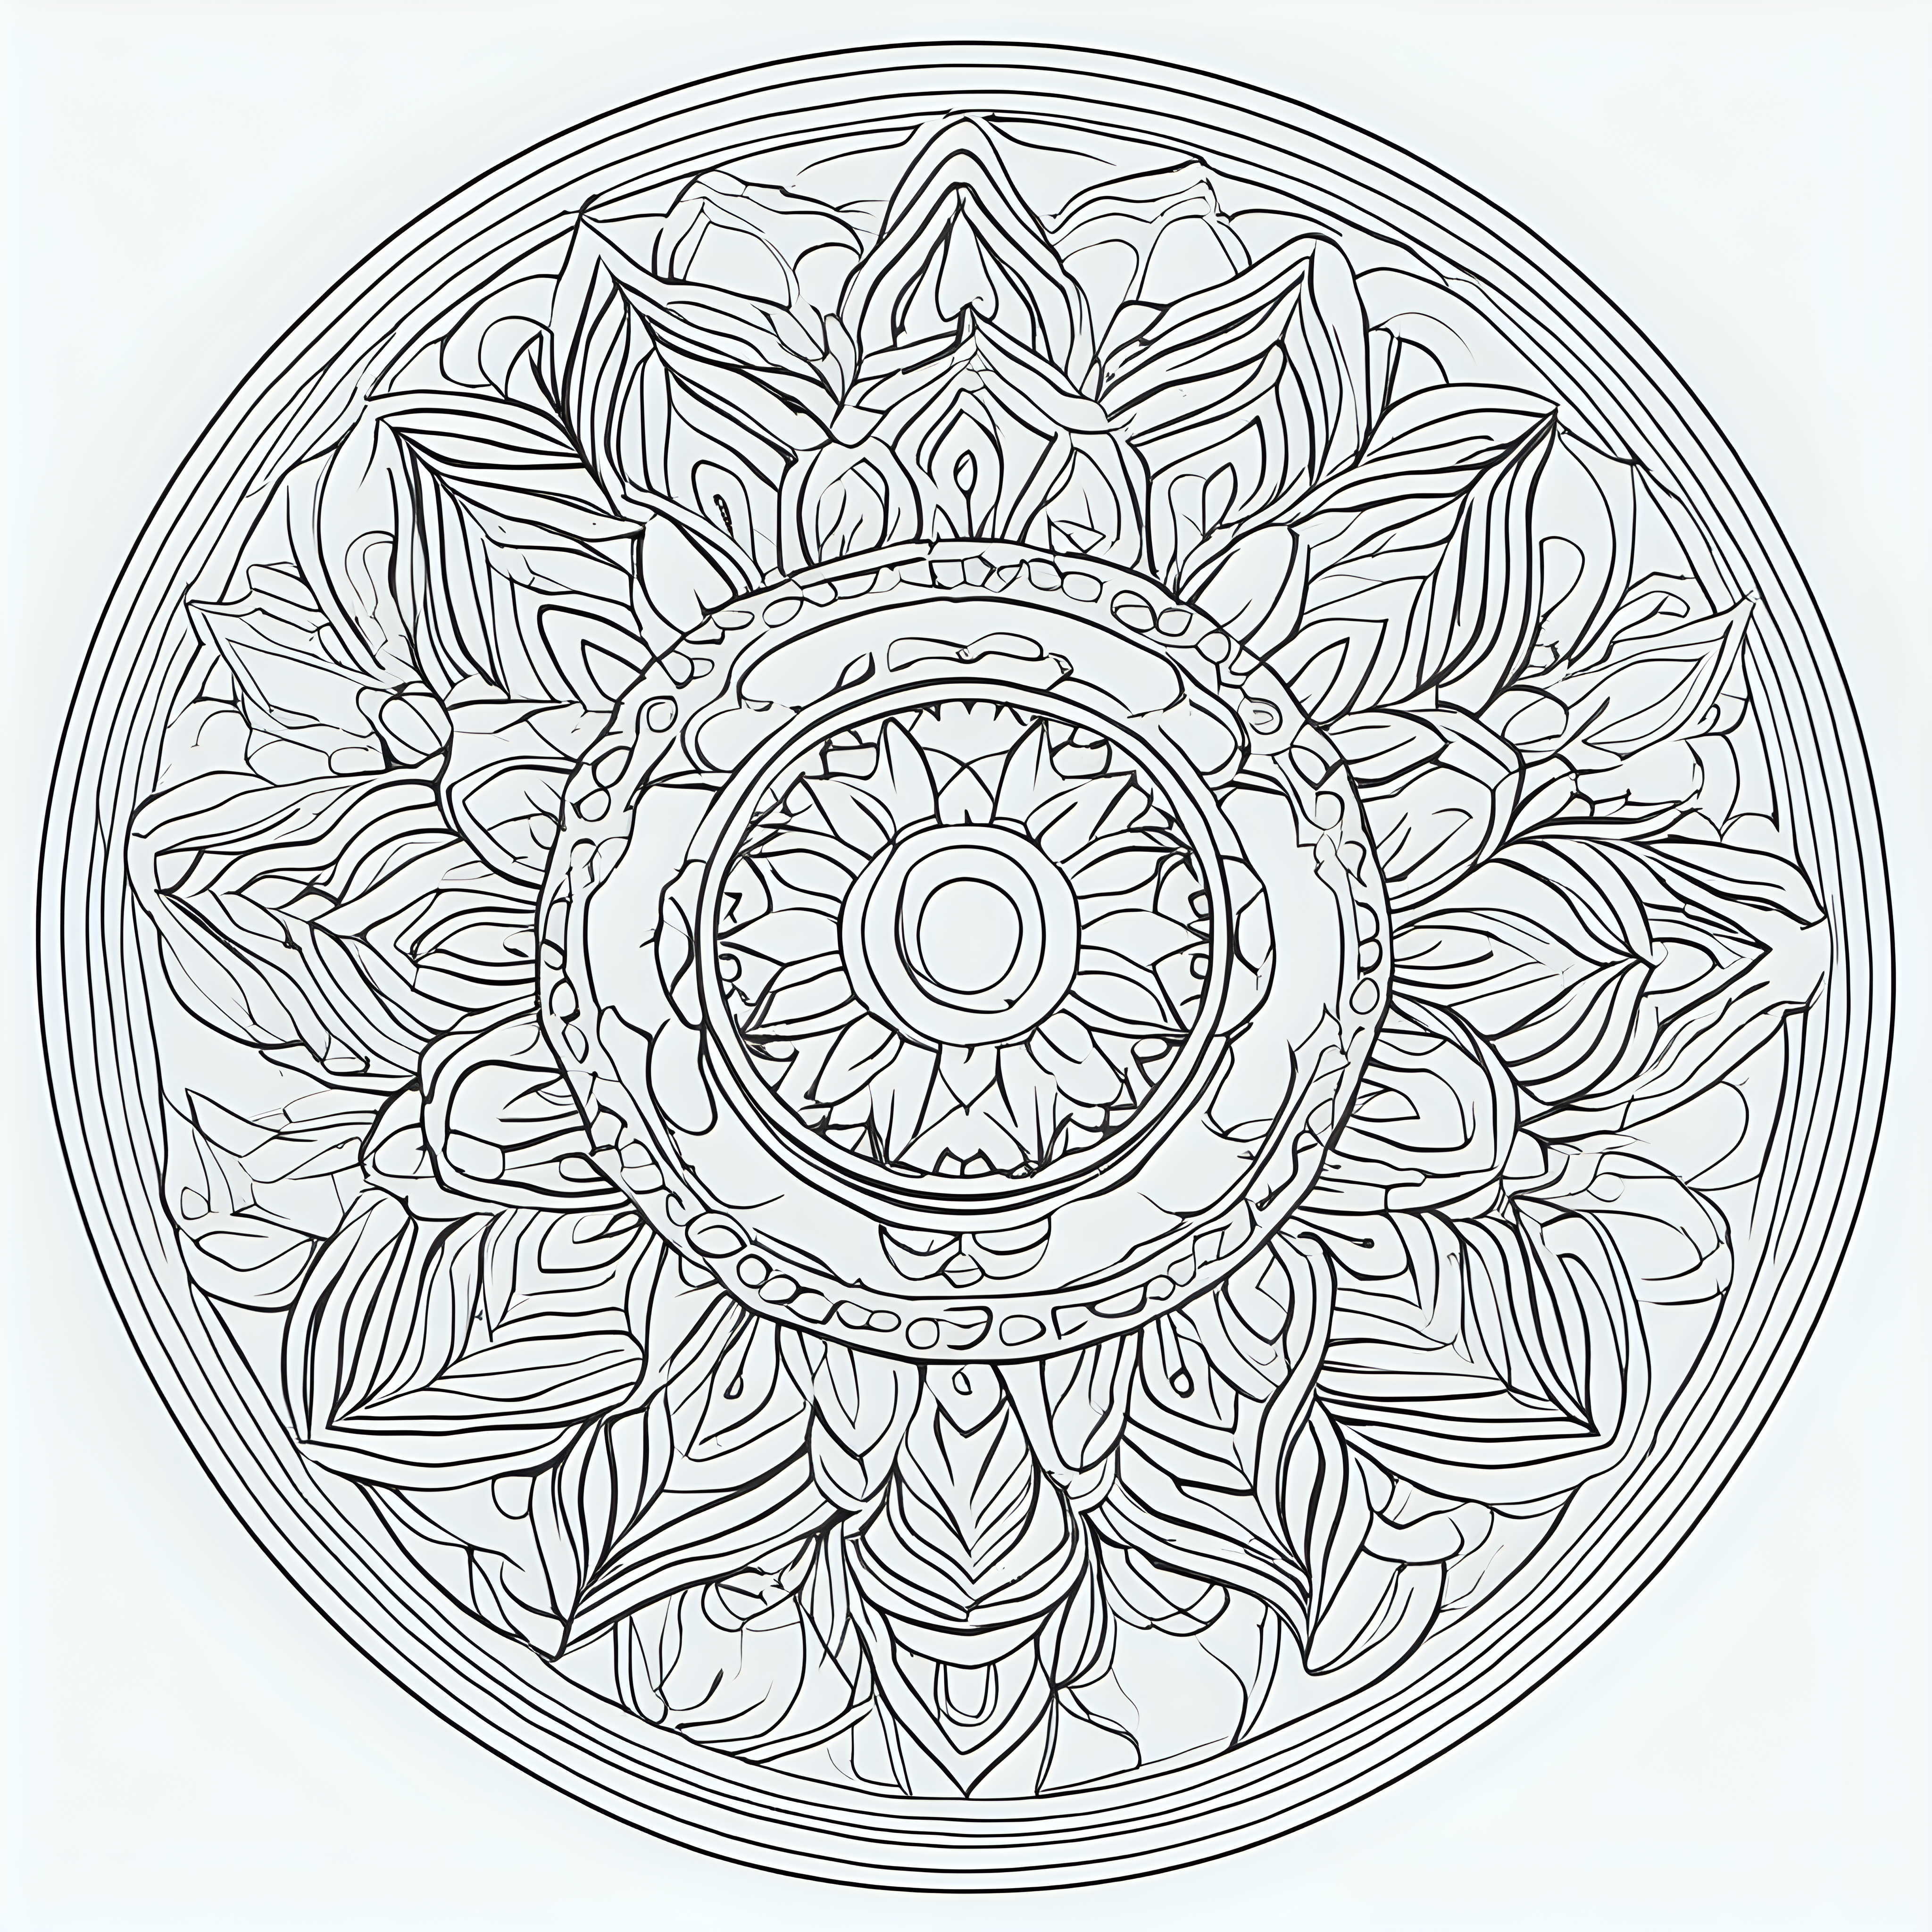 create a mandala for a coloring book that